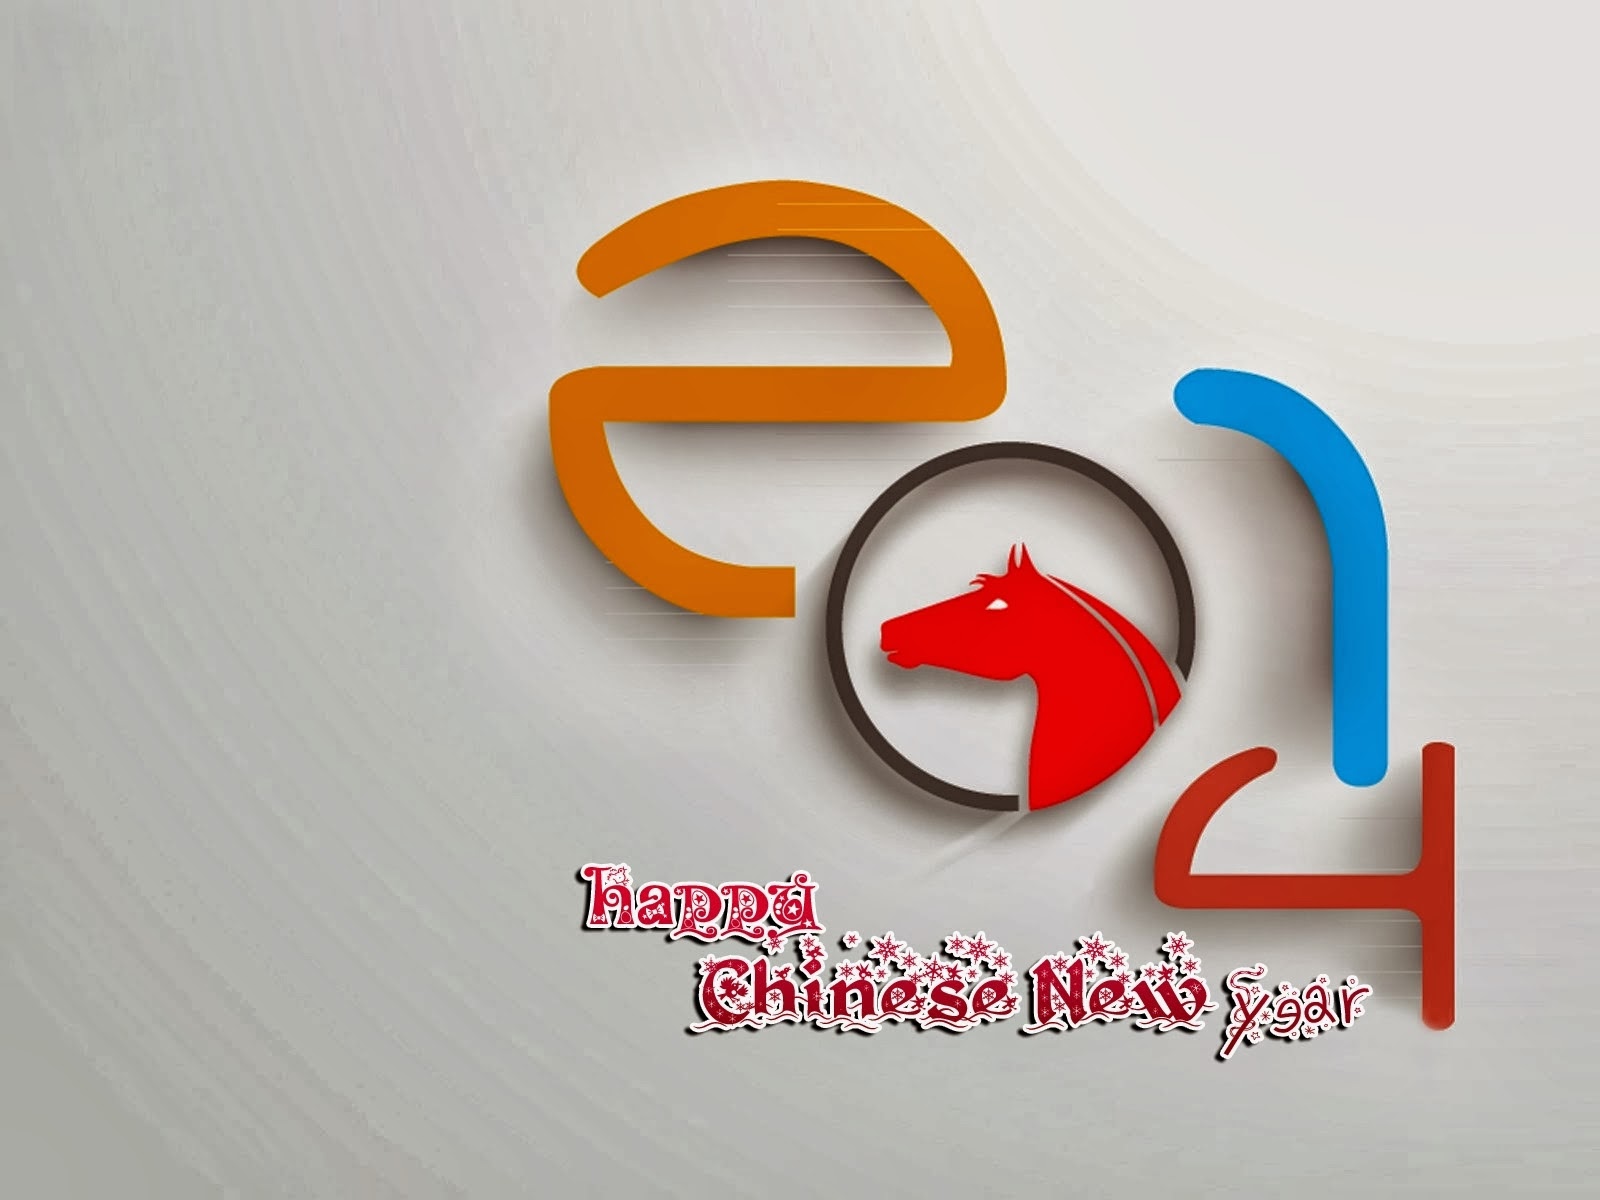 Happy-Chinese-New-Year-2014-Wishes-Card-Picture-Chinese-New-Year-2014-Greetings-Images-Happy-Lunar-New-Year-2014-Wallpaper.JPG